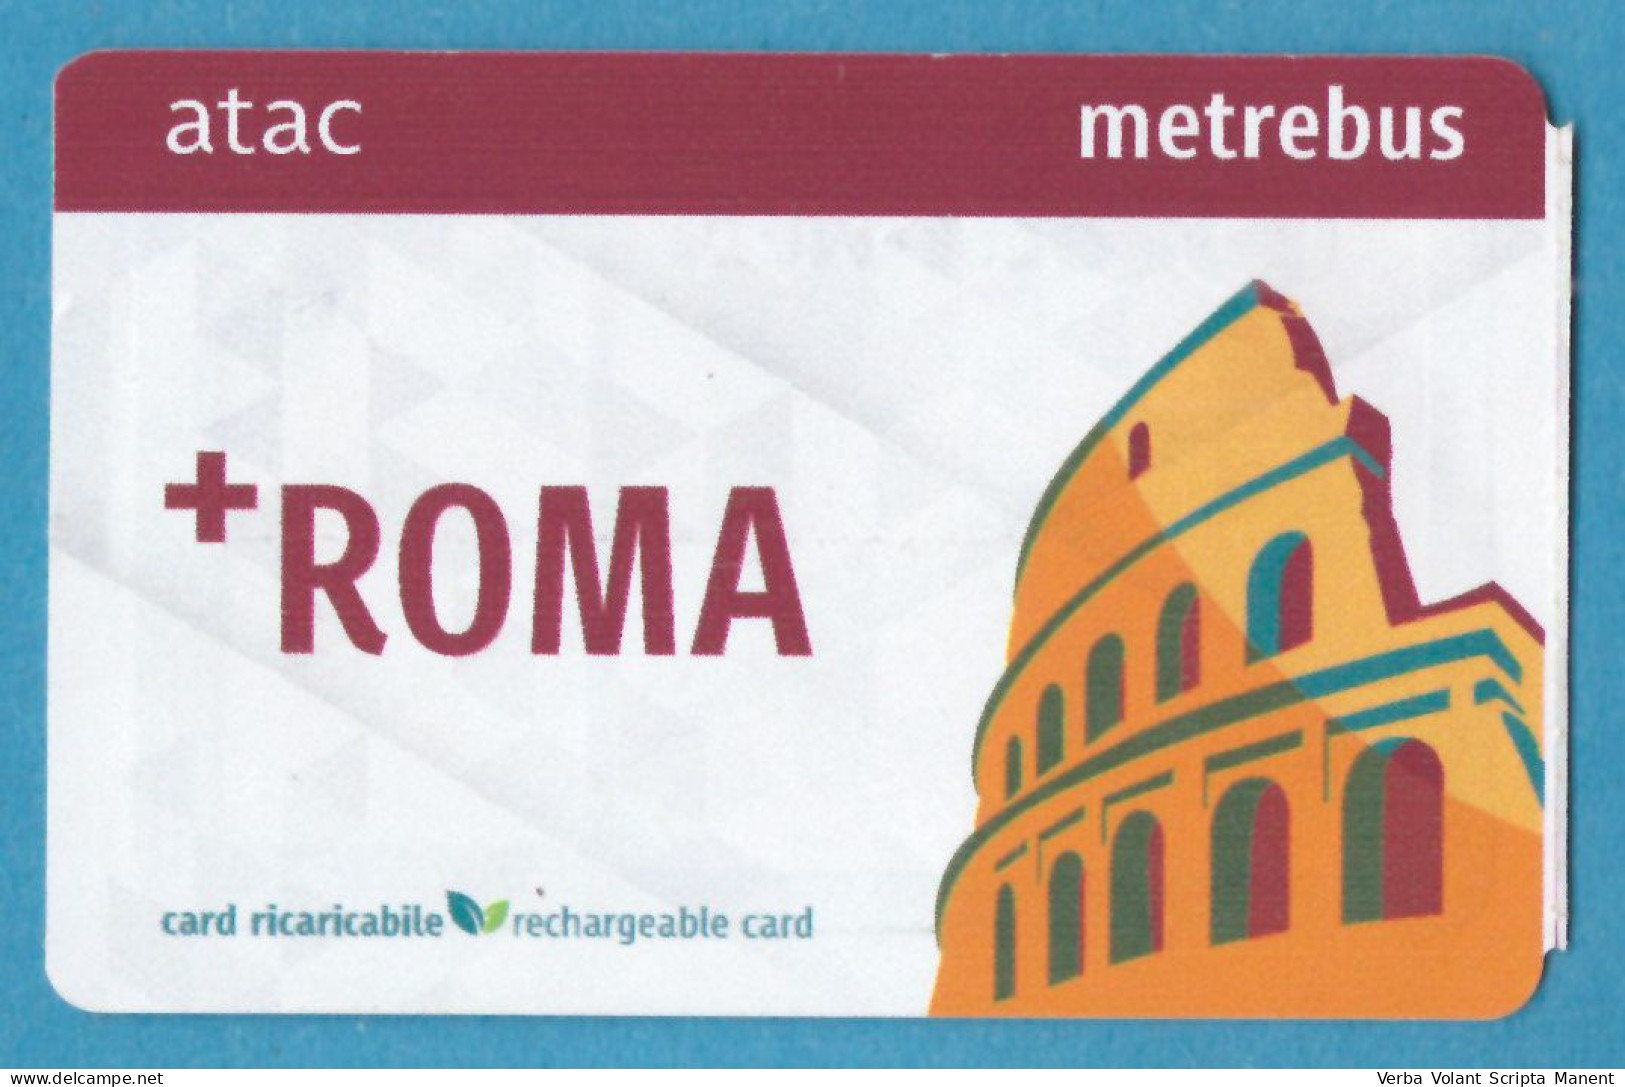 H-0600 * ITALY - Card Ricaricabile / Rechargeable +ROMA, ATAC Metrebus - Europa